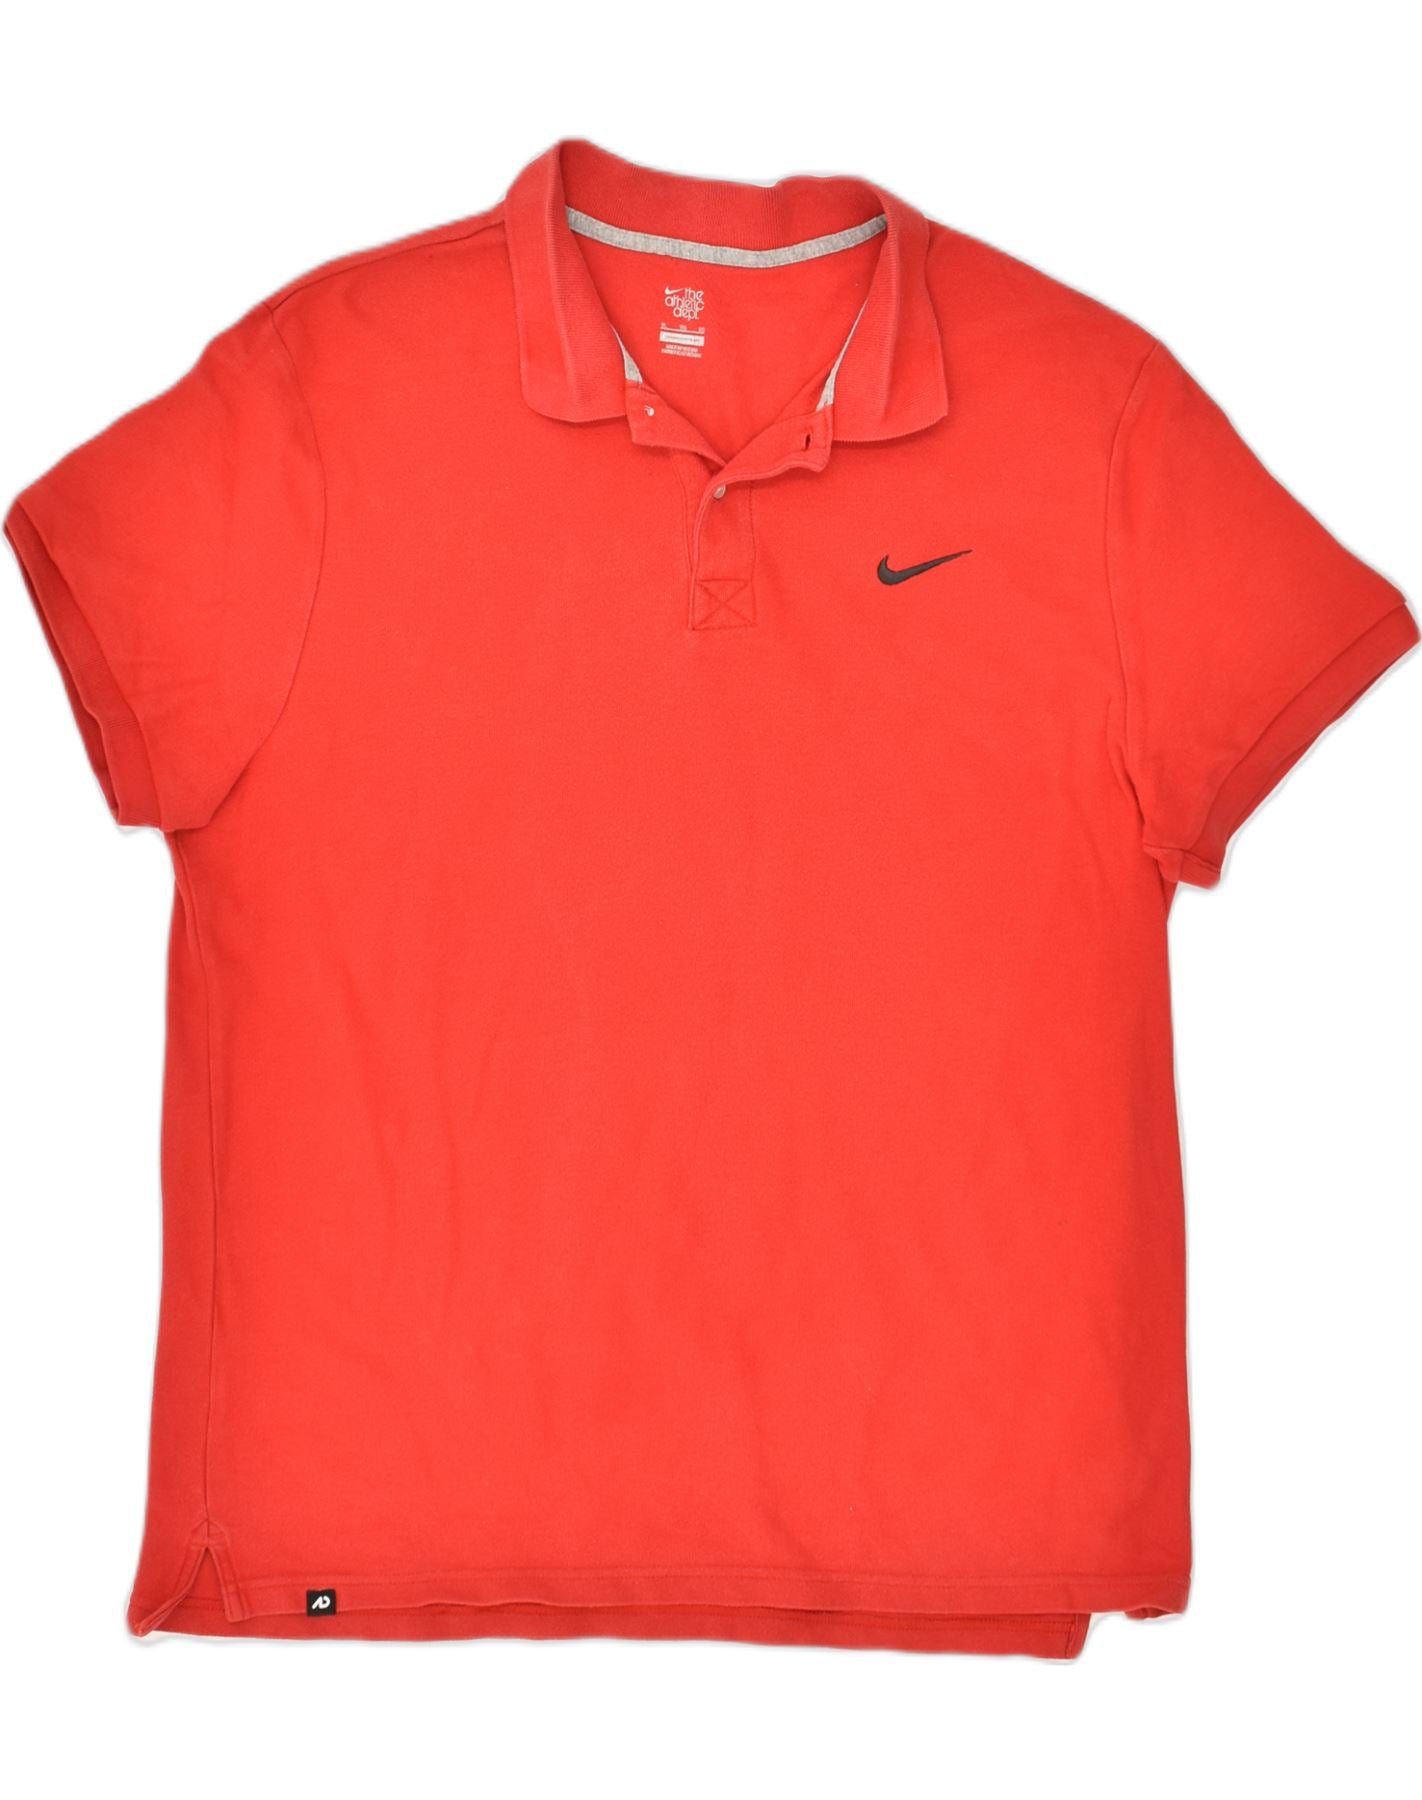 NIKE Mens The Athletic Dept. Polo Shirt XL Red Cotton